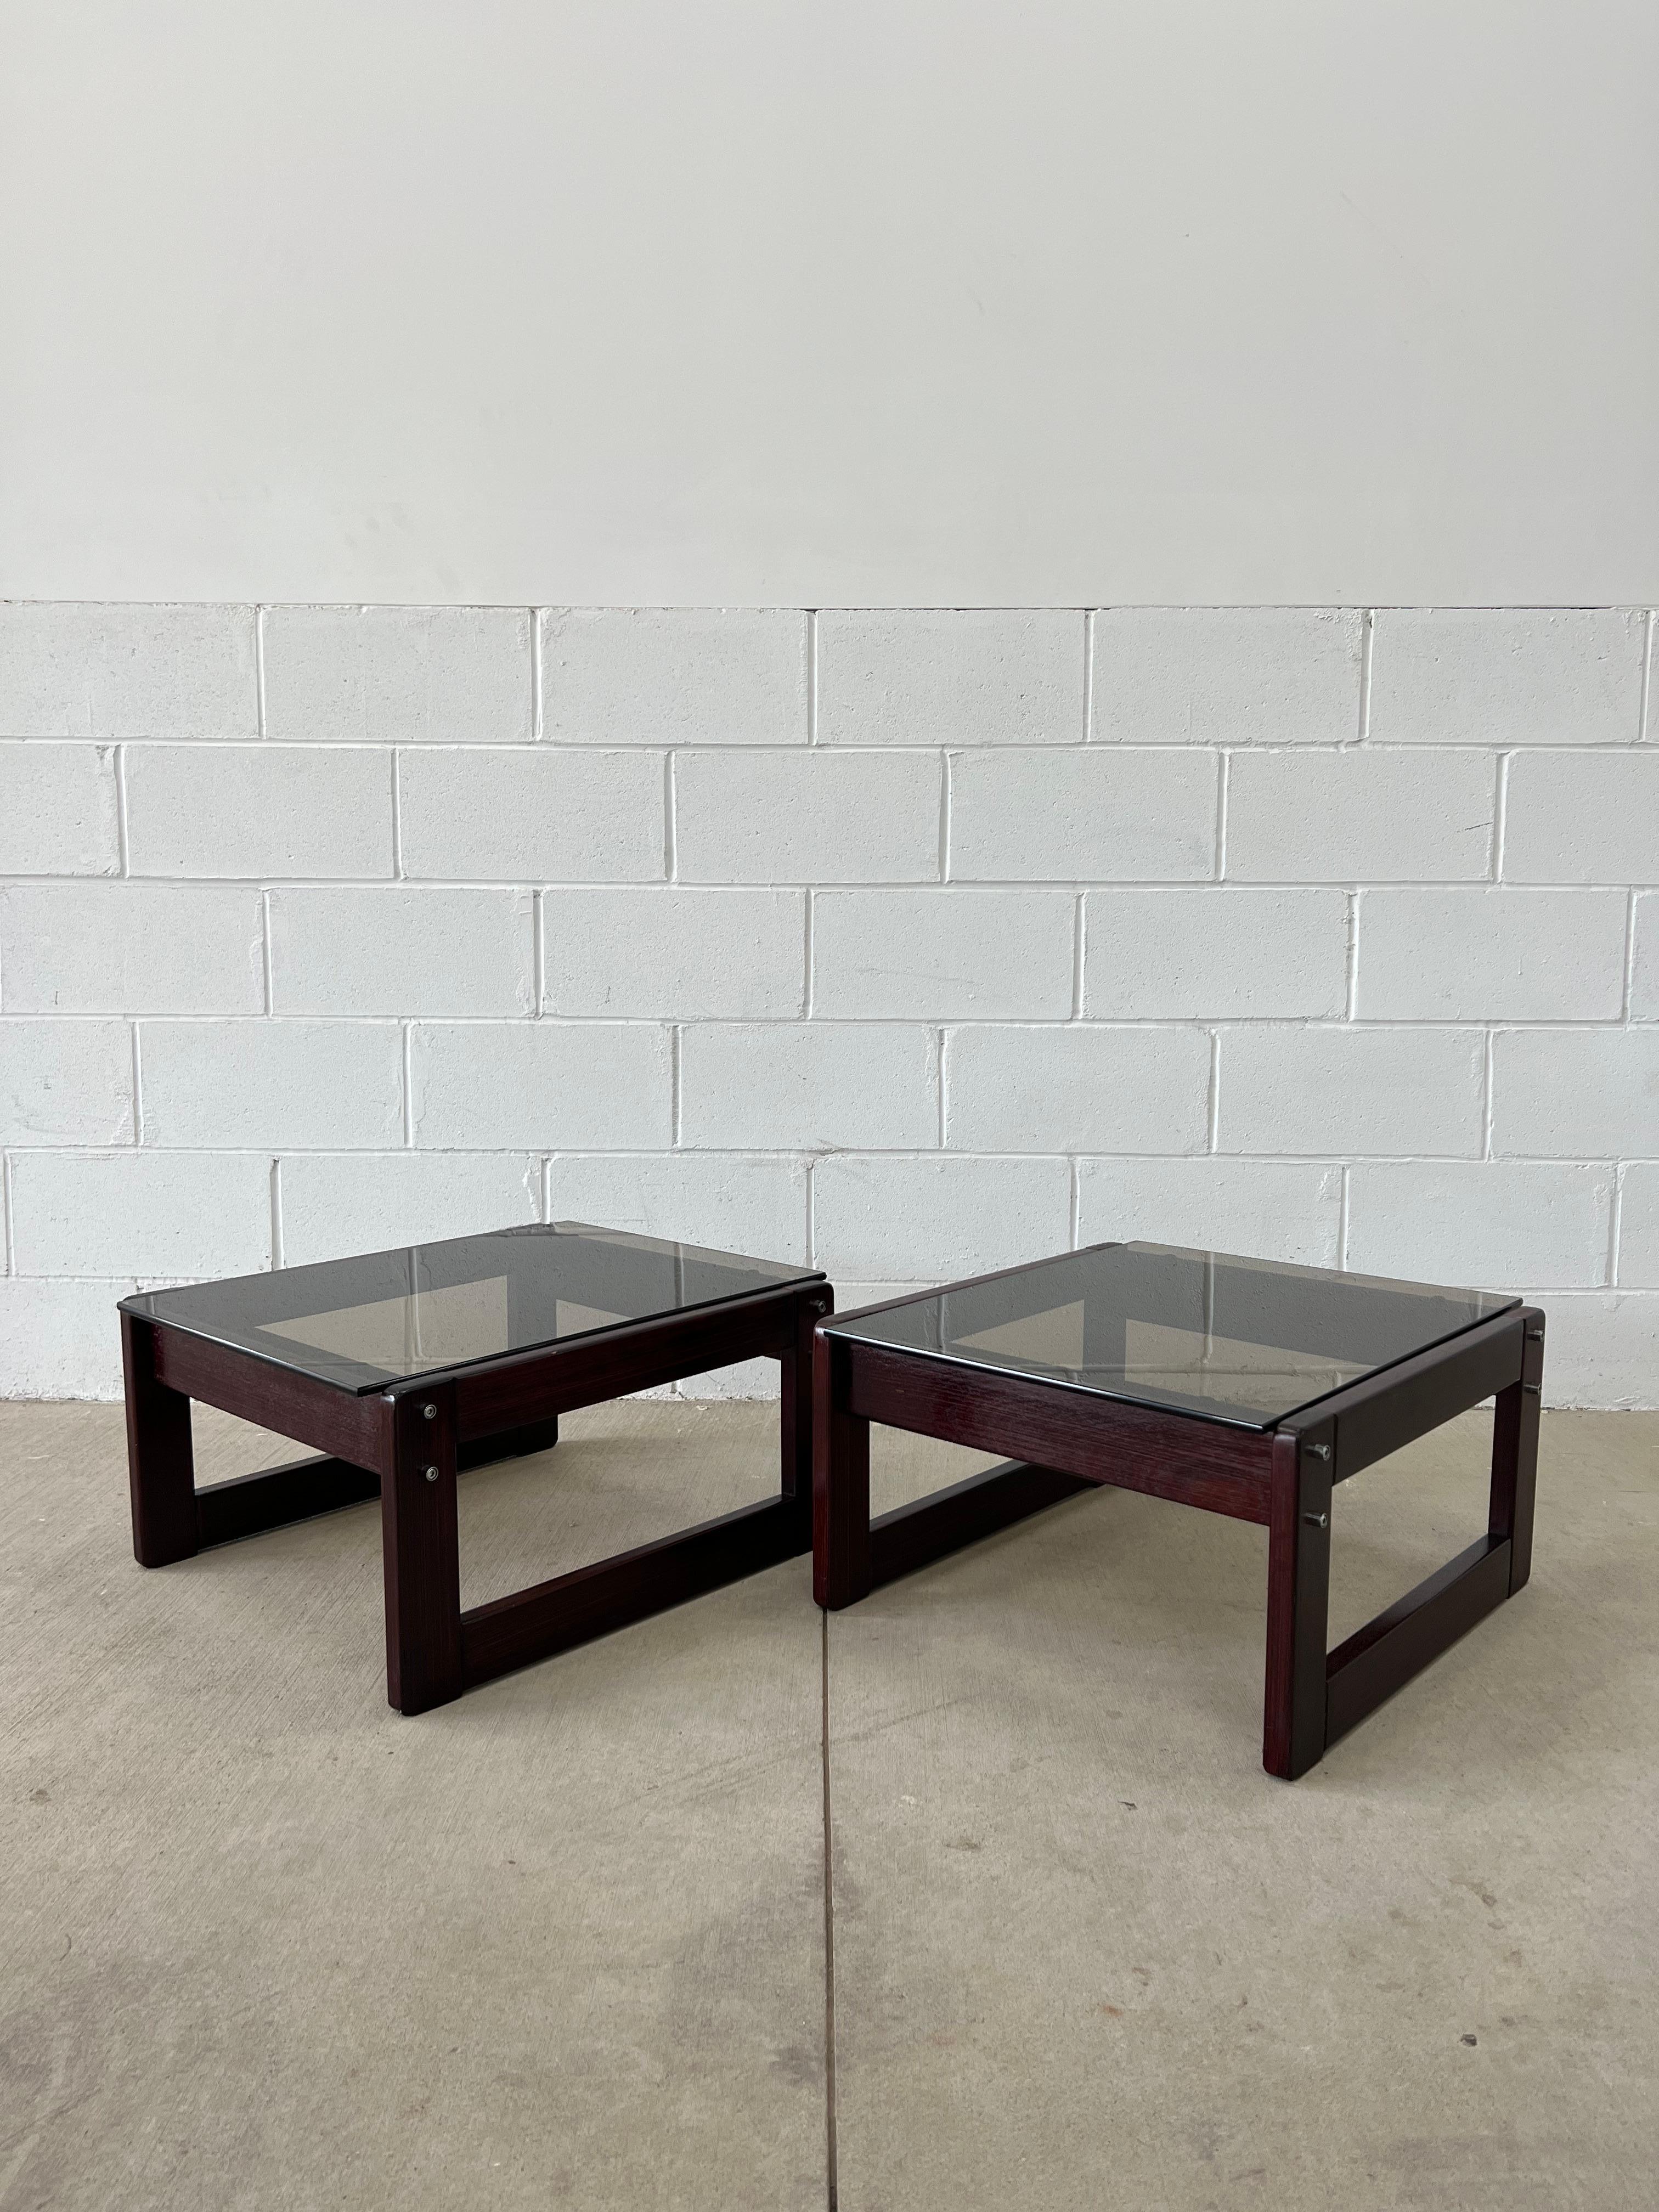 Pair of Jacaranda Brazilian rosewood side tables by Percival Lafer. No label.